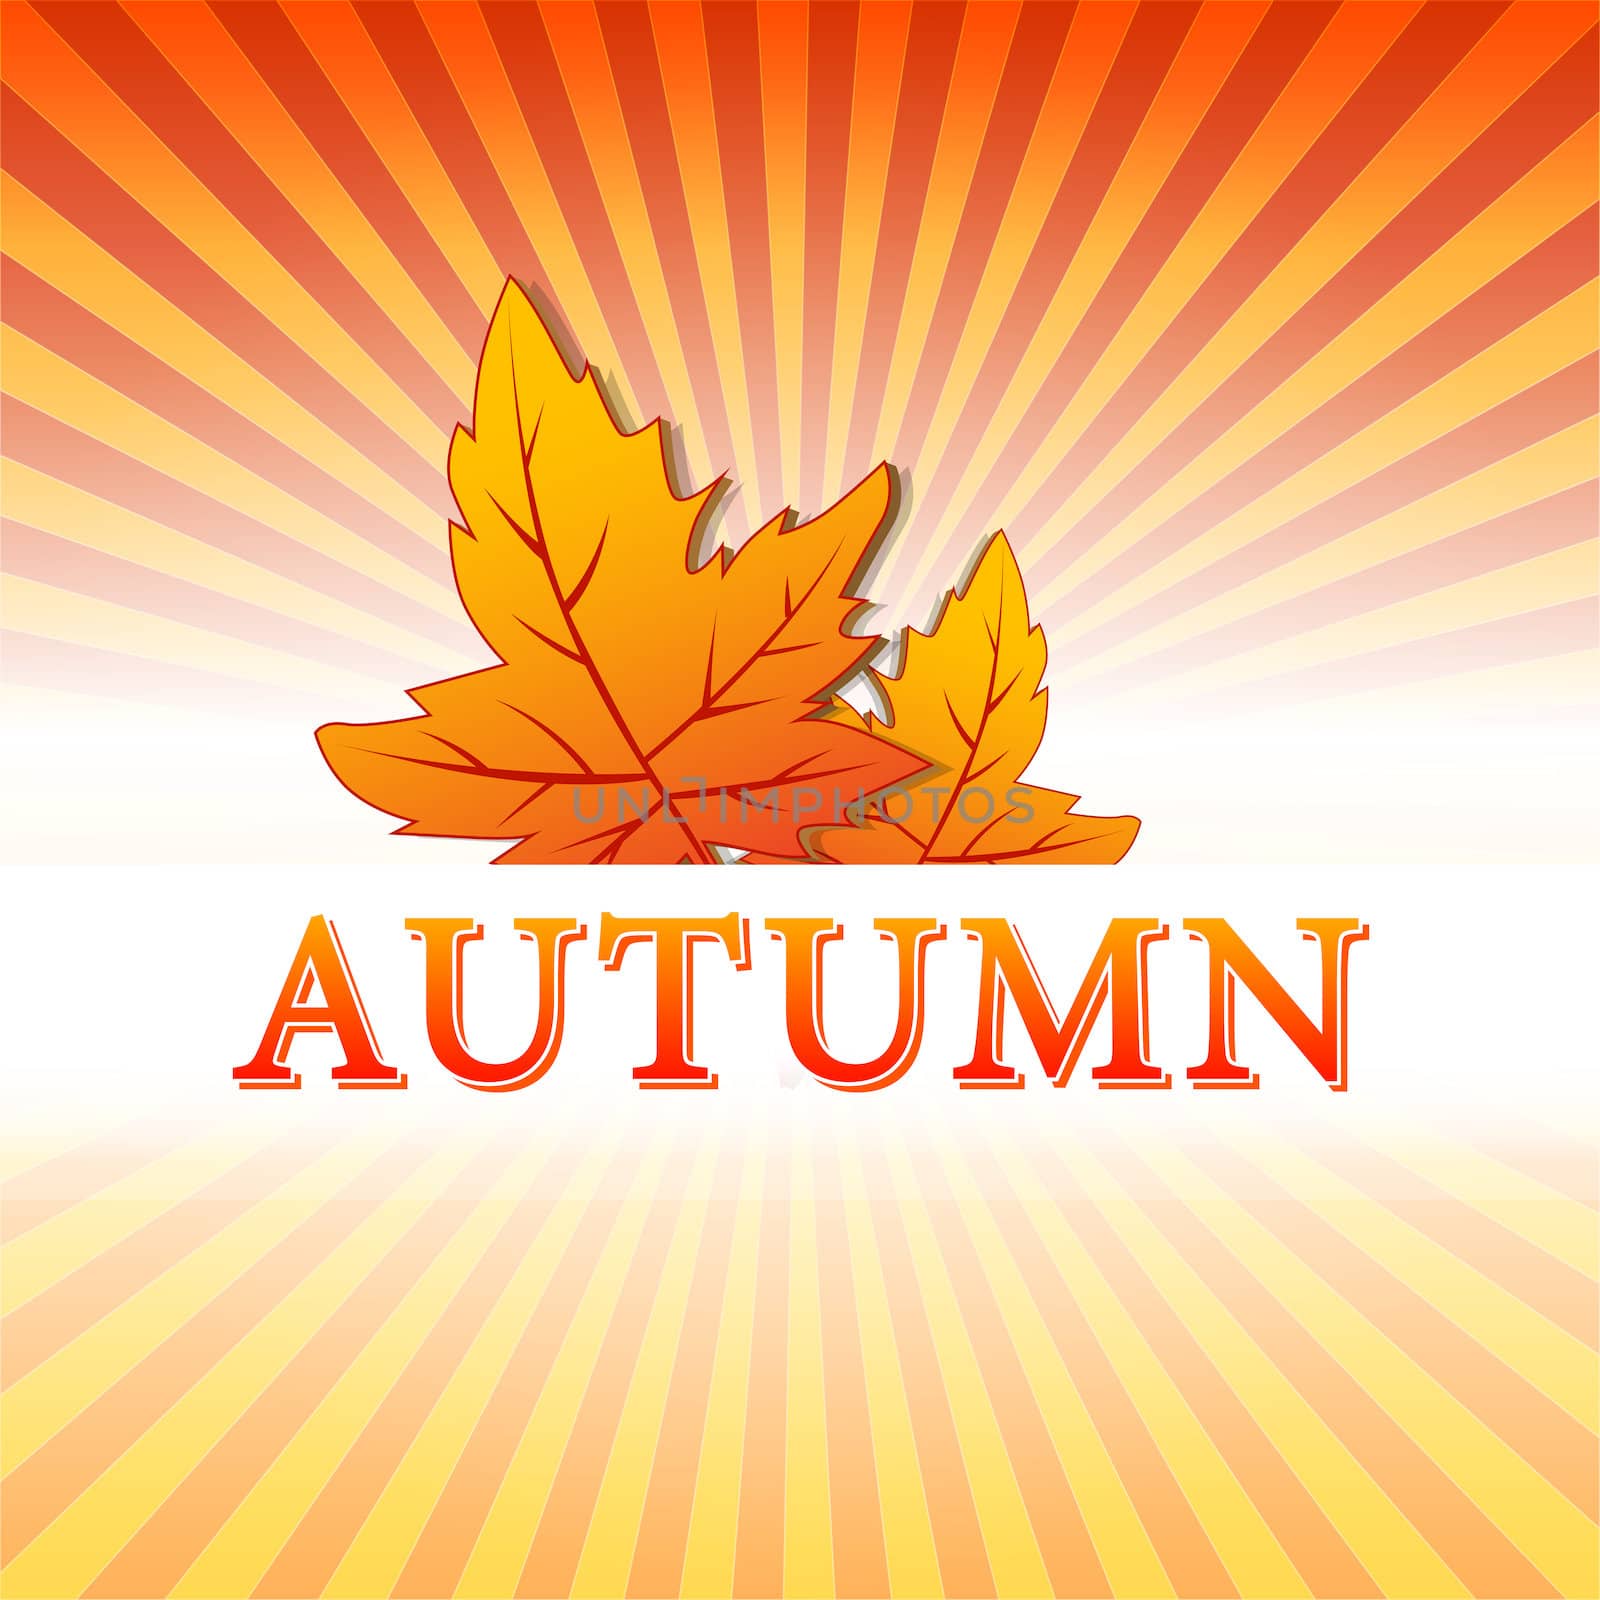 autumn illustration with fall leaves and rays by marinini